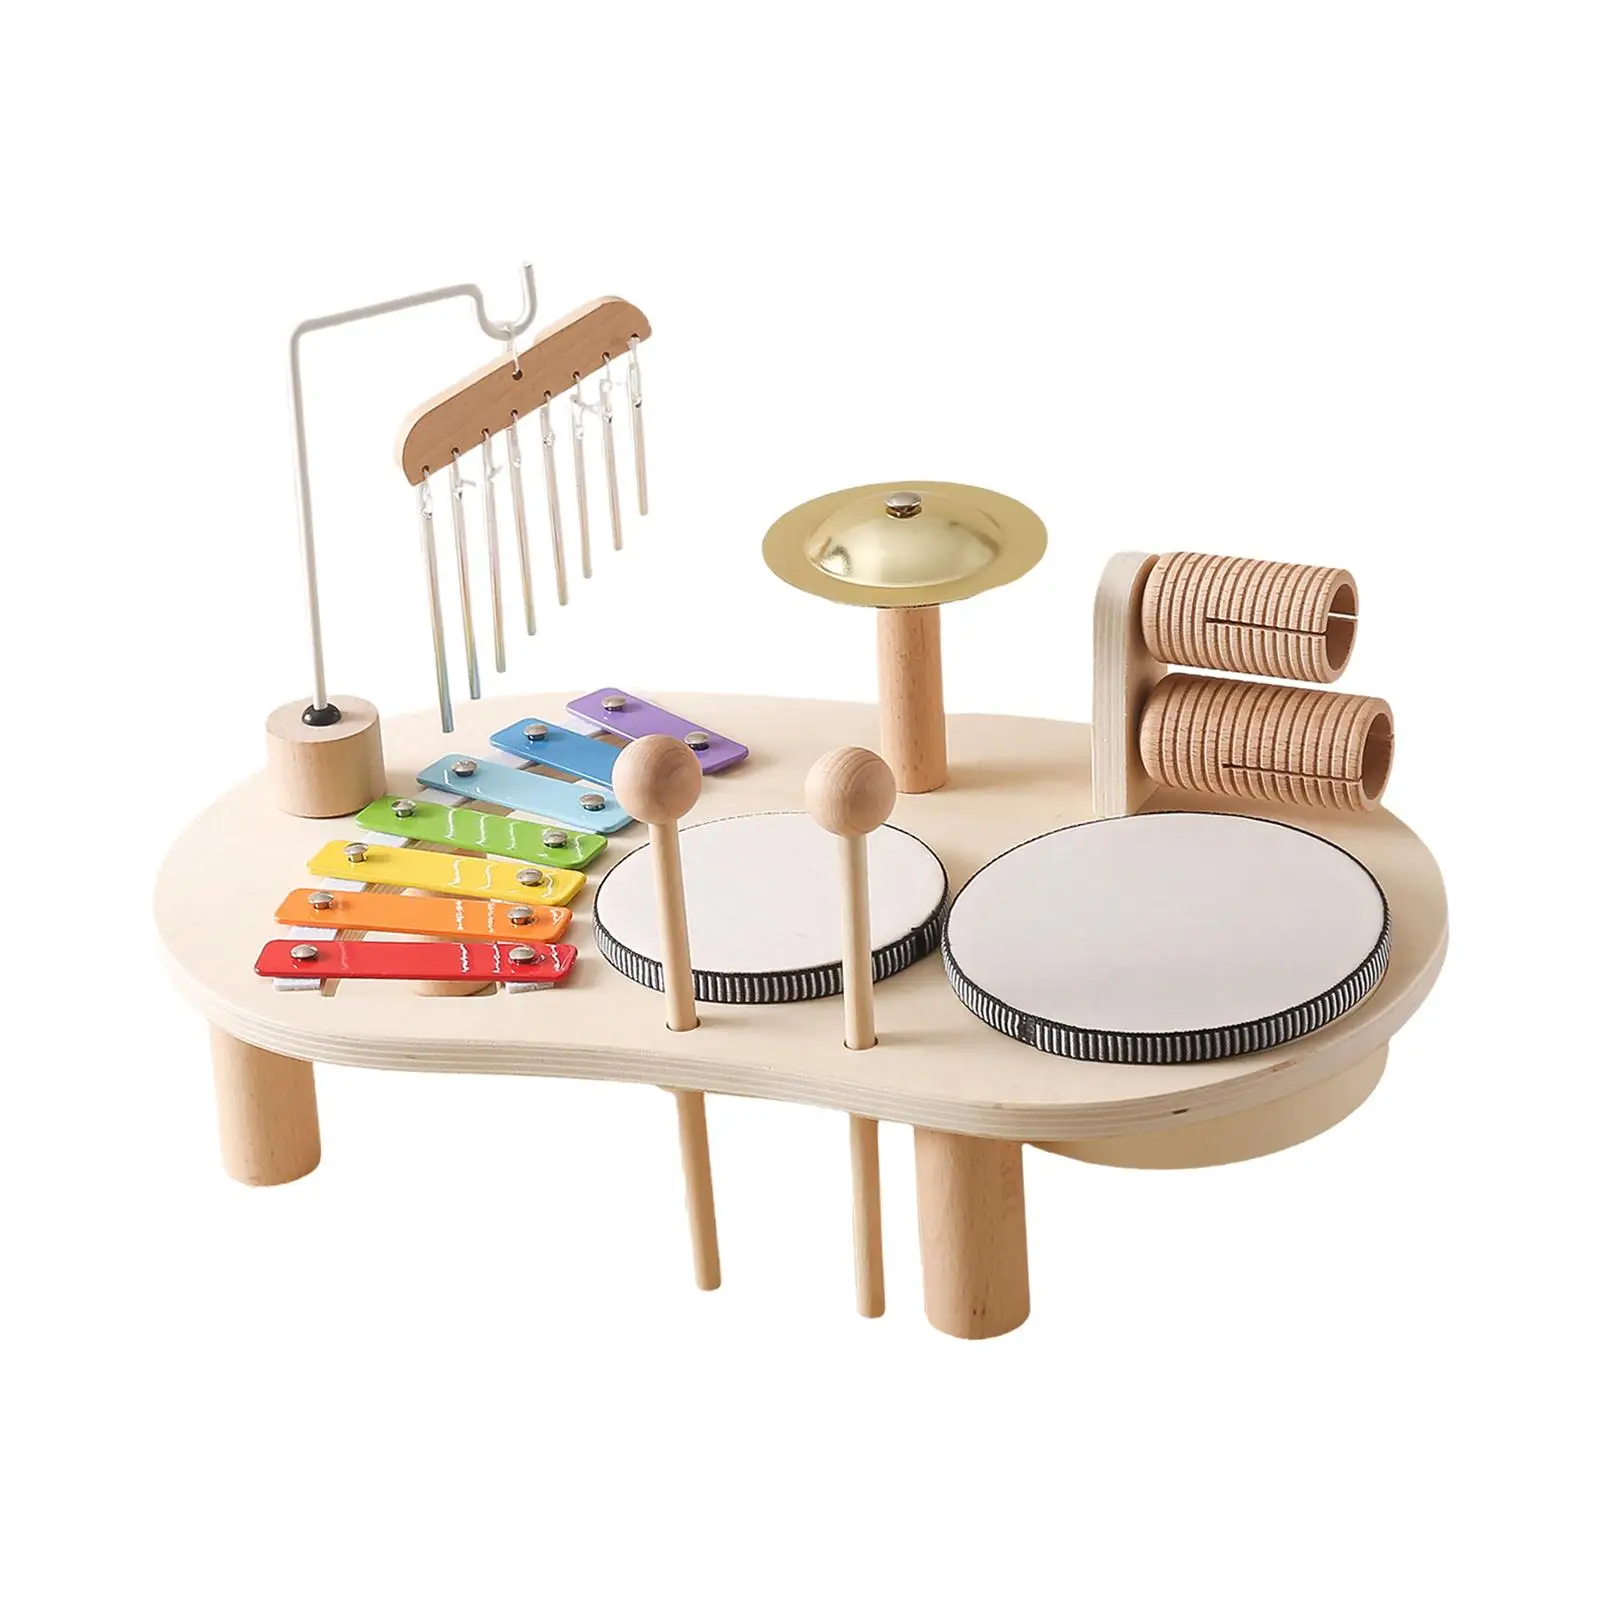 Kids Drum Set Hand Eye Coordination Developmental Wooden Musical Kits for Kids Ages 3 4 5 6 Years Old Boy Girl Holiday Gifts